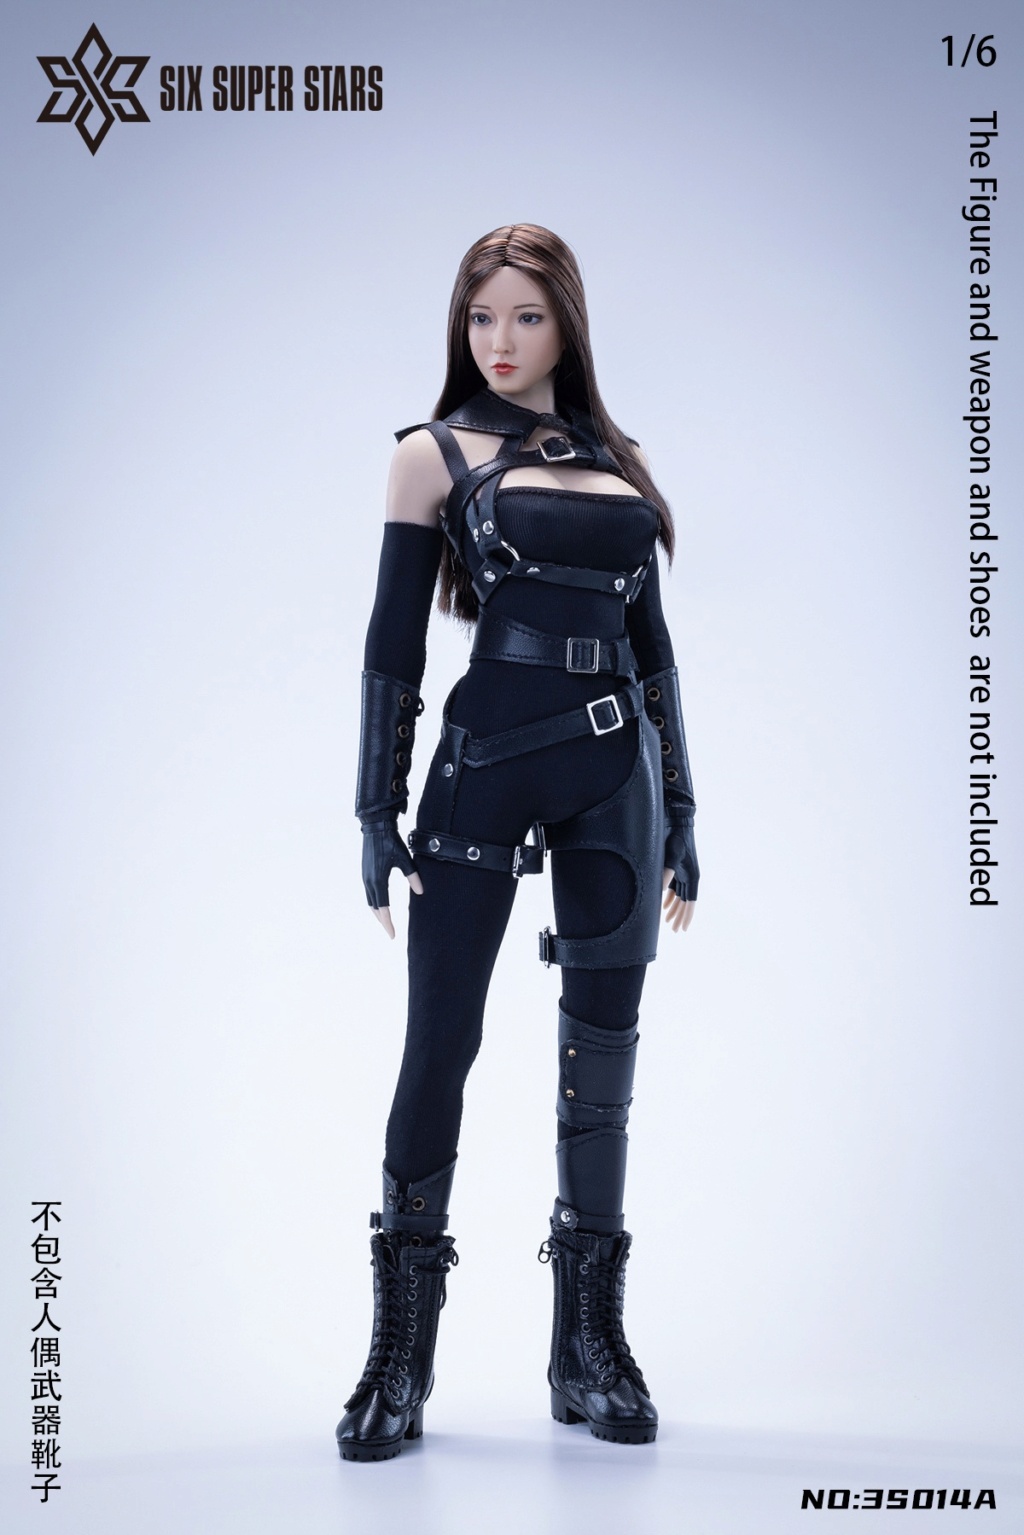 Clothing - NEW PRODUCT: Six Super Stars: 1/6 Shooter Tights Female Soldier Dolls Without HeadCarving Gel Body 3S014A/B 10190411